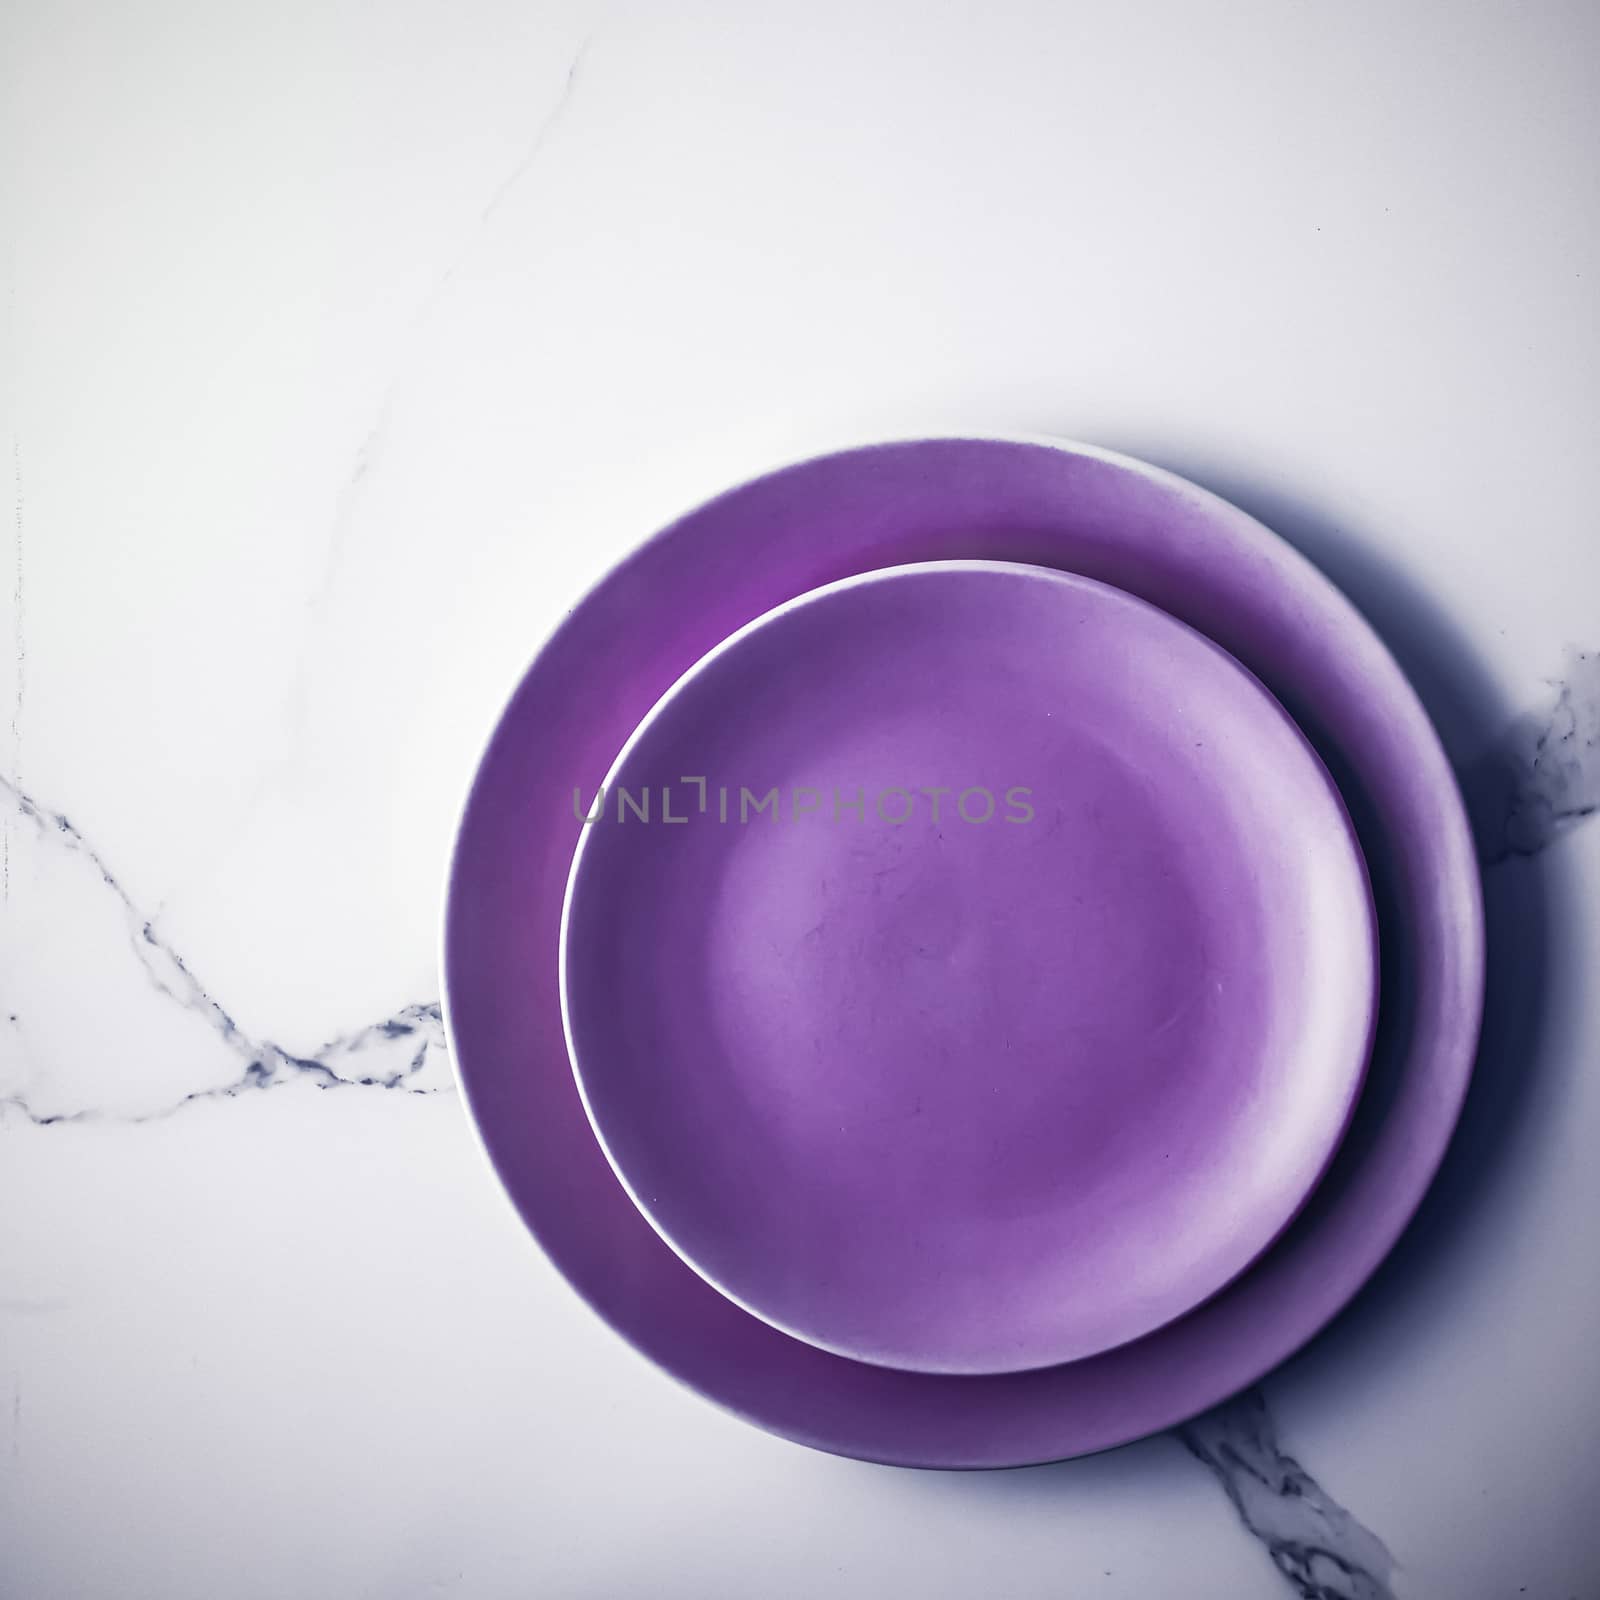 Purple empty plate on marble table background, tableware decor f by Anneleven